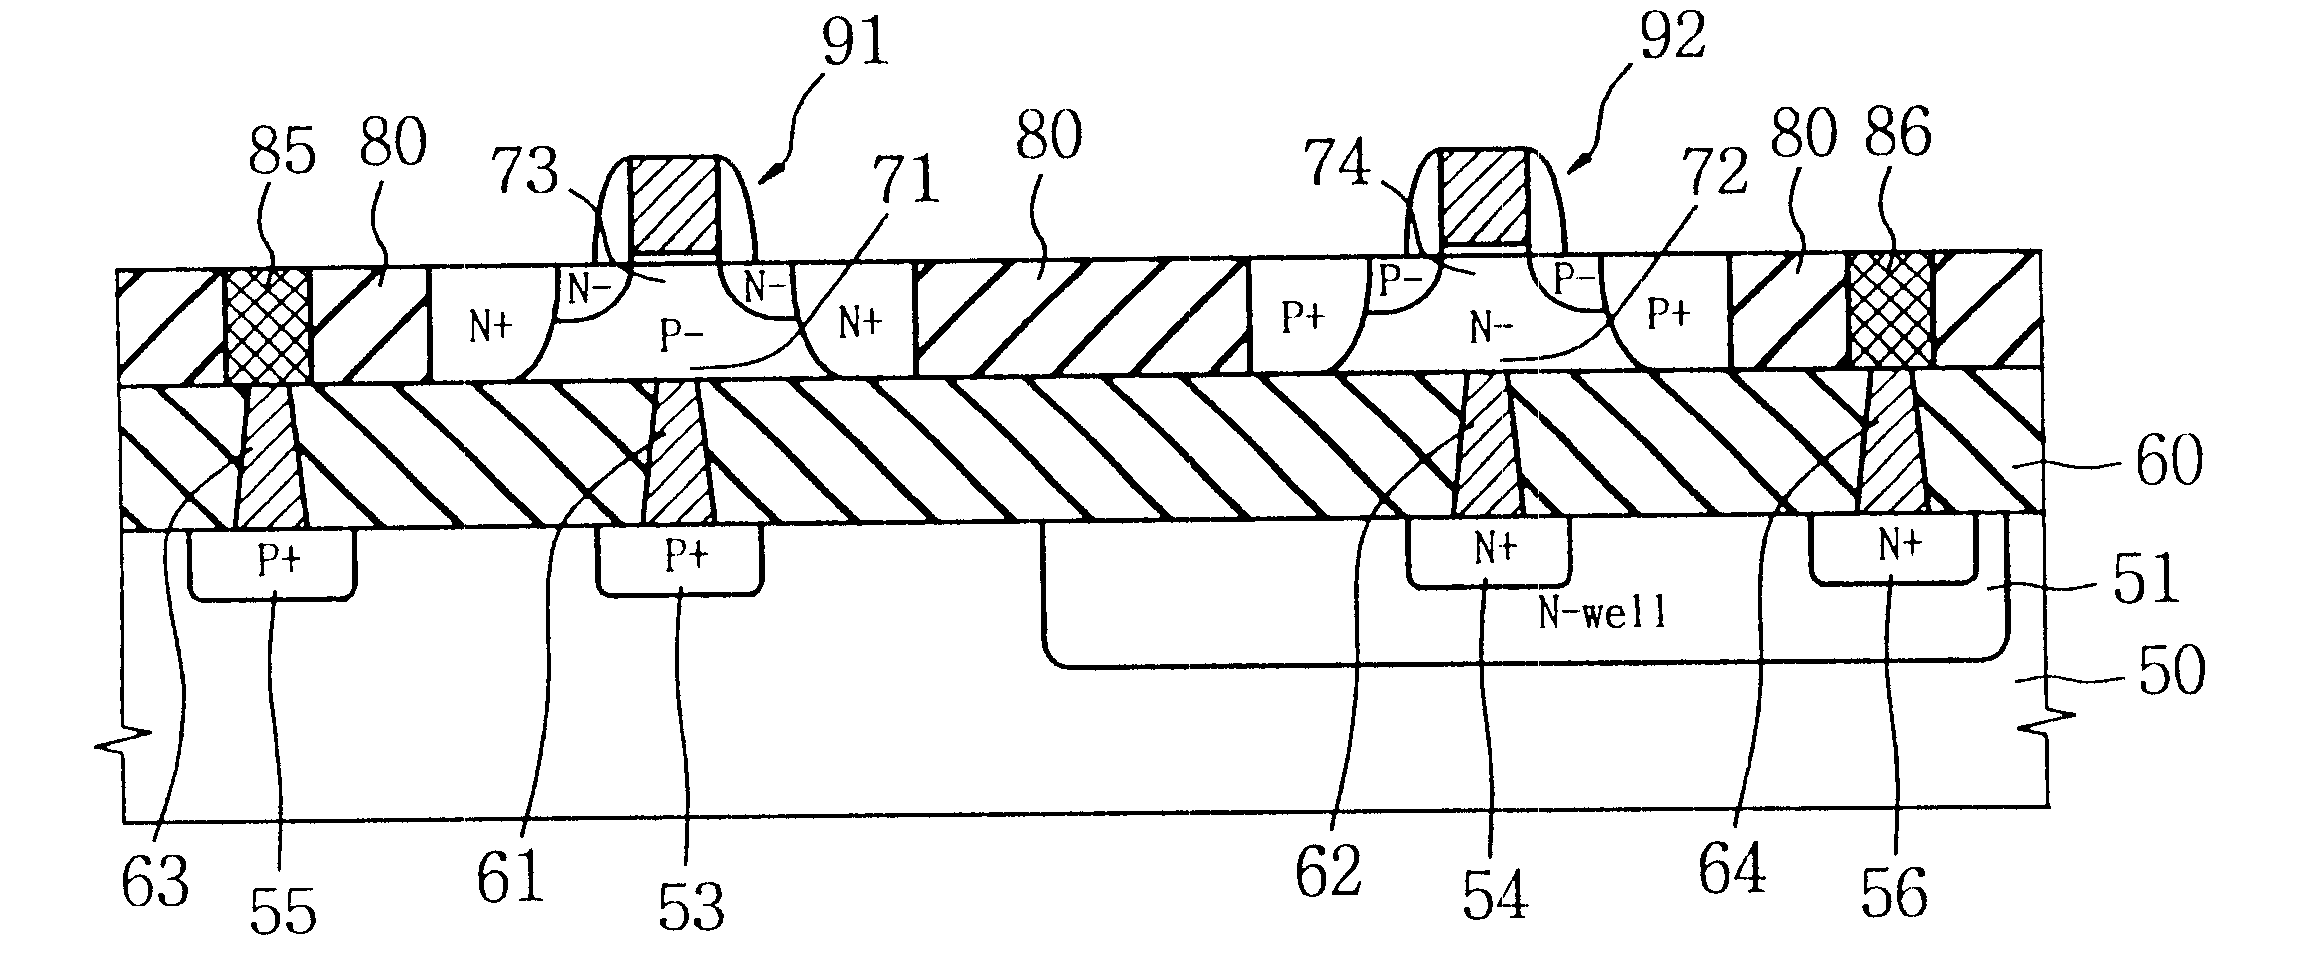 Silicon-on-insulator (SOI) substrate, method for fabricating SOI substrate and SOI MOSFET using the SOI substrate